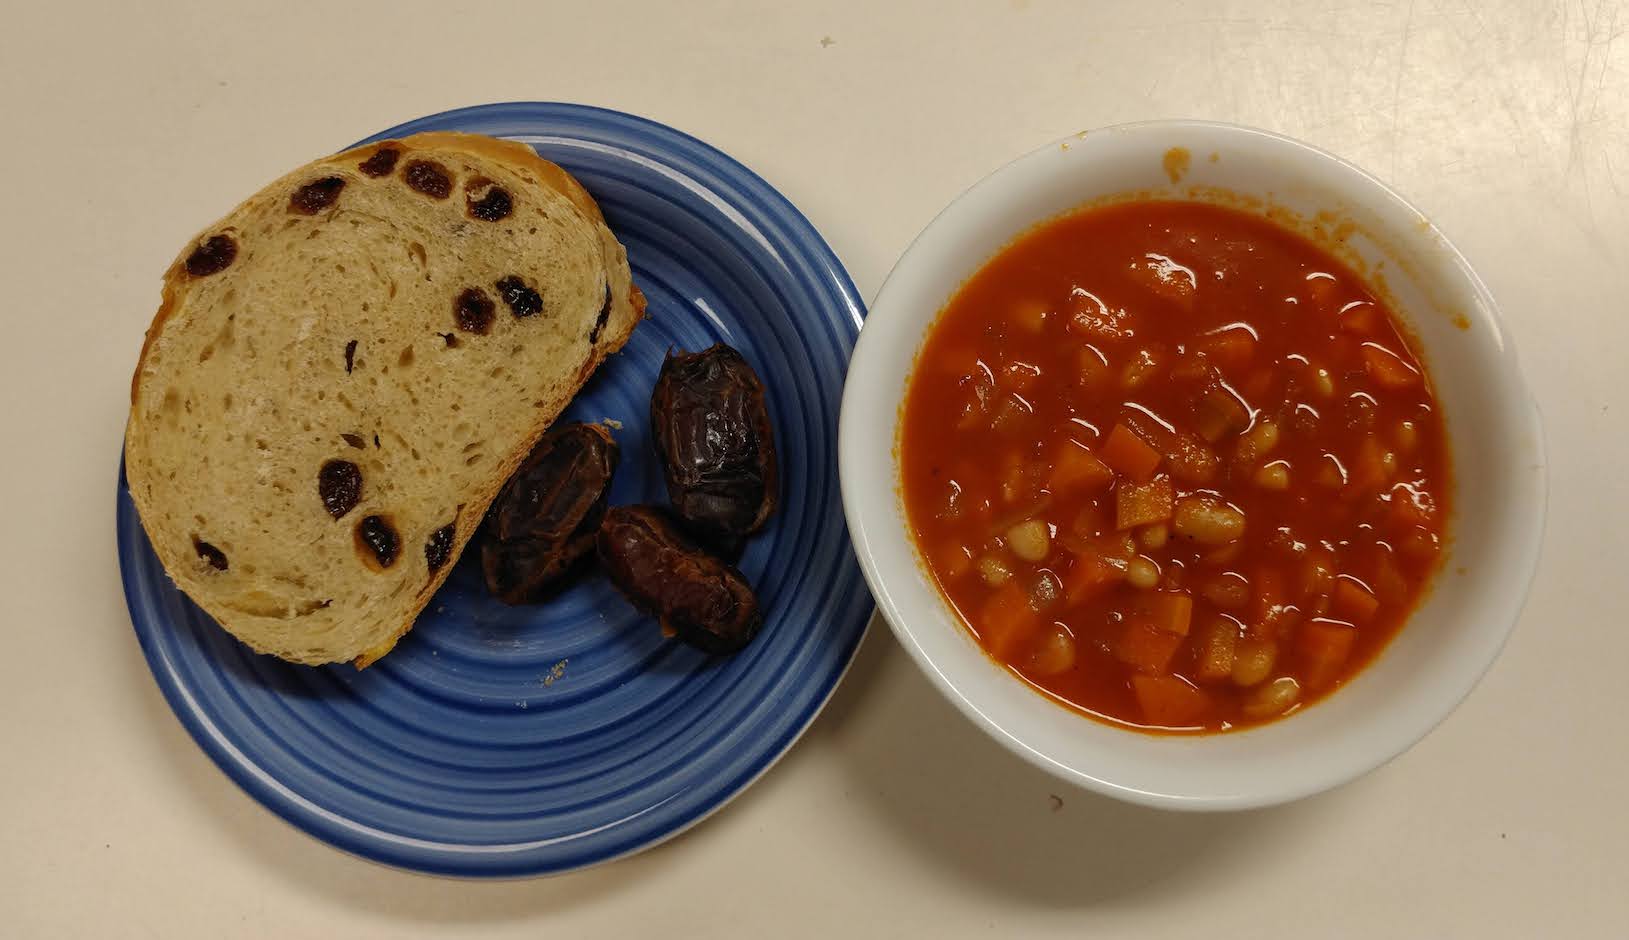 soup with side of bread and dates